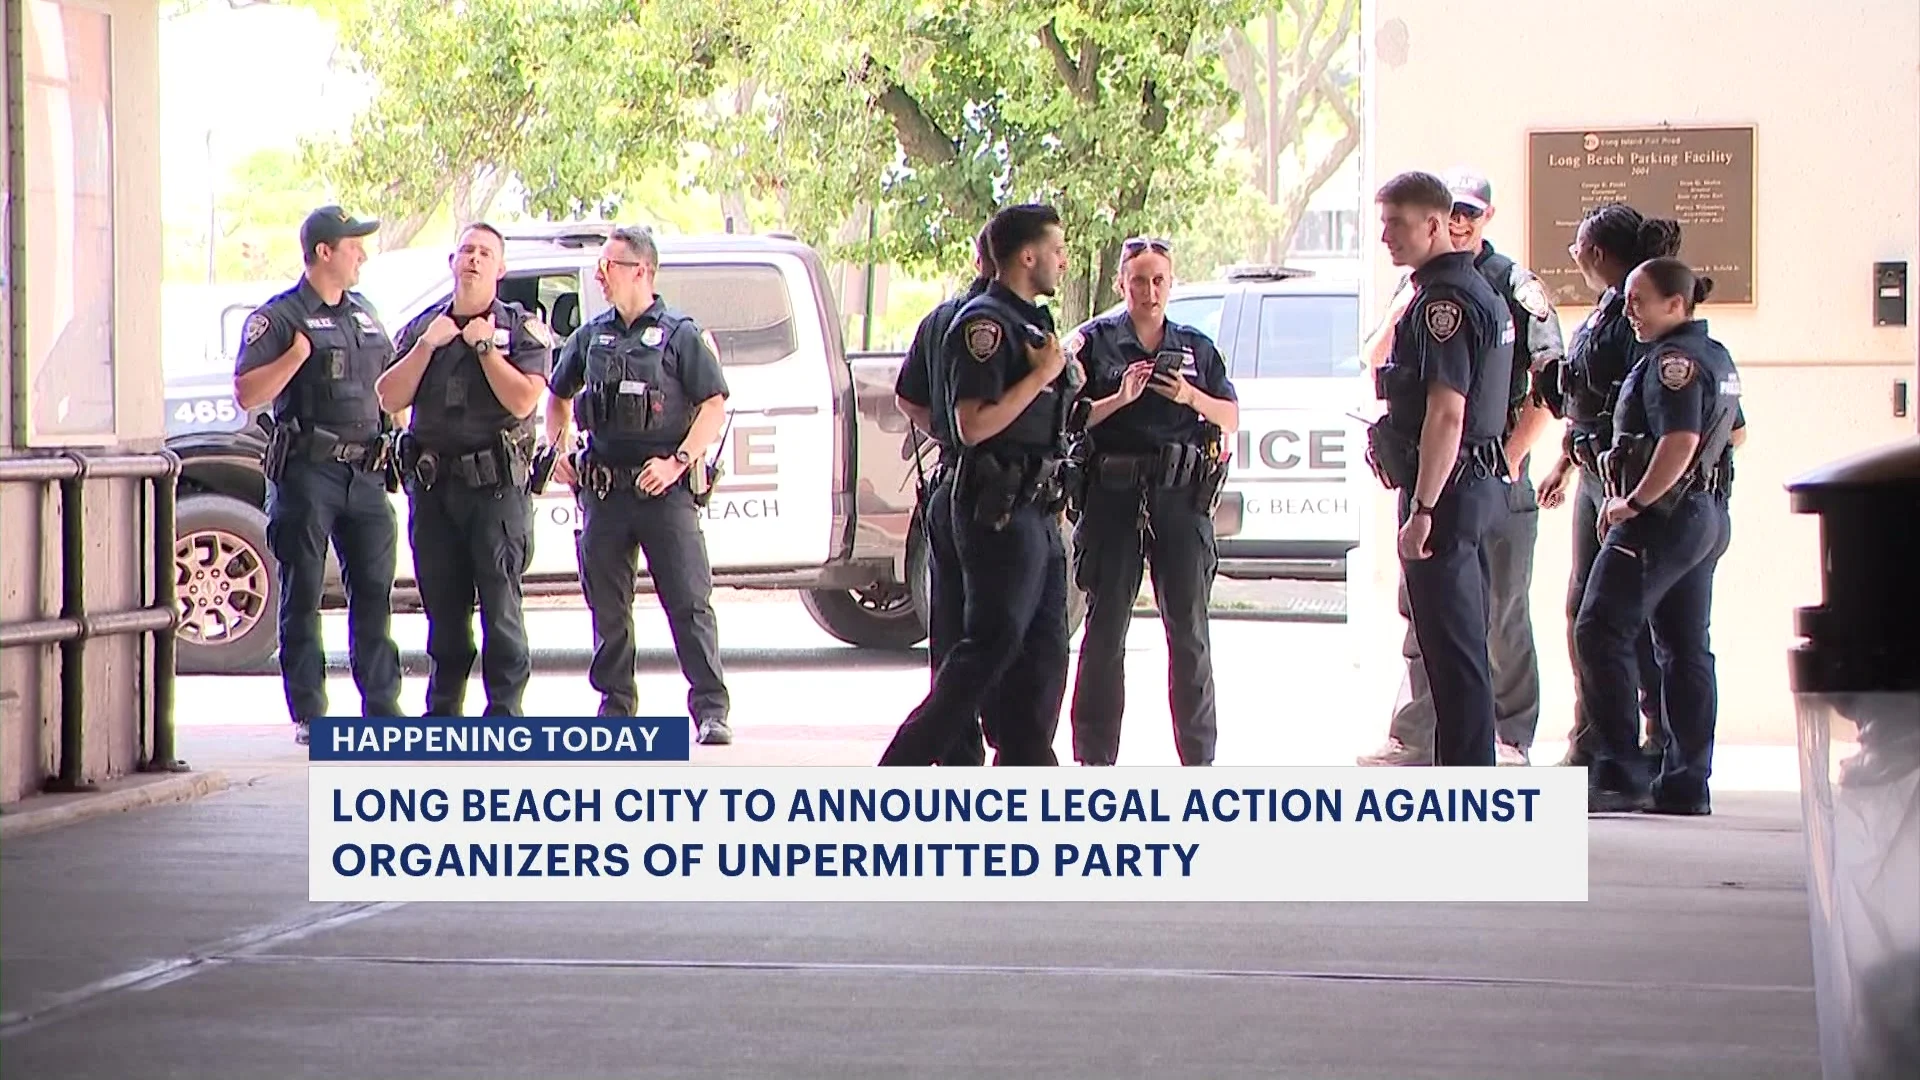 Long Beach to announce legal action against organizers of unpermitted party